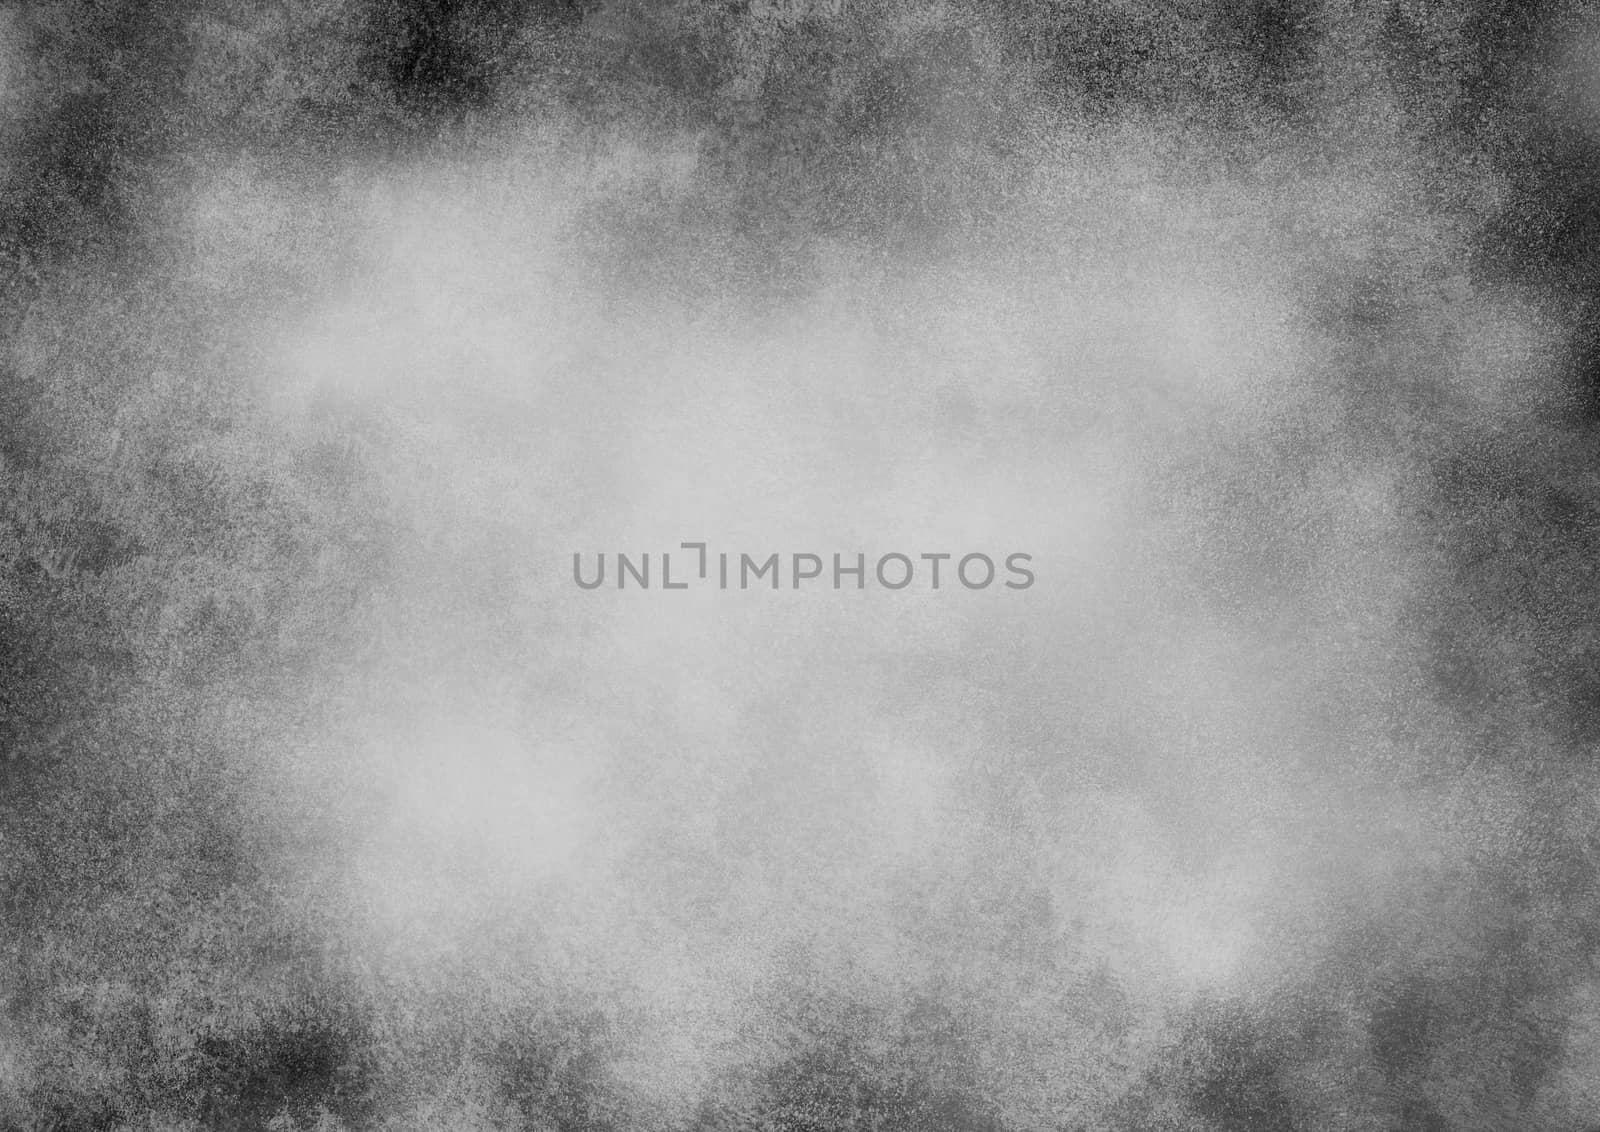 Abstract dark vintage texture. Scratched, faded effected background in black and white colors.